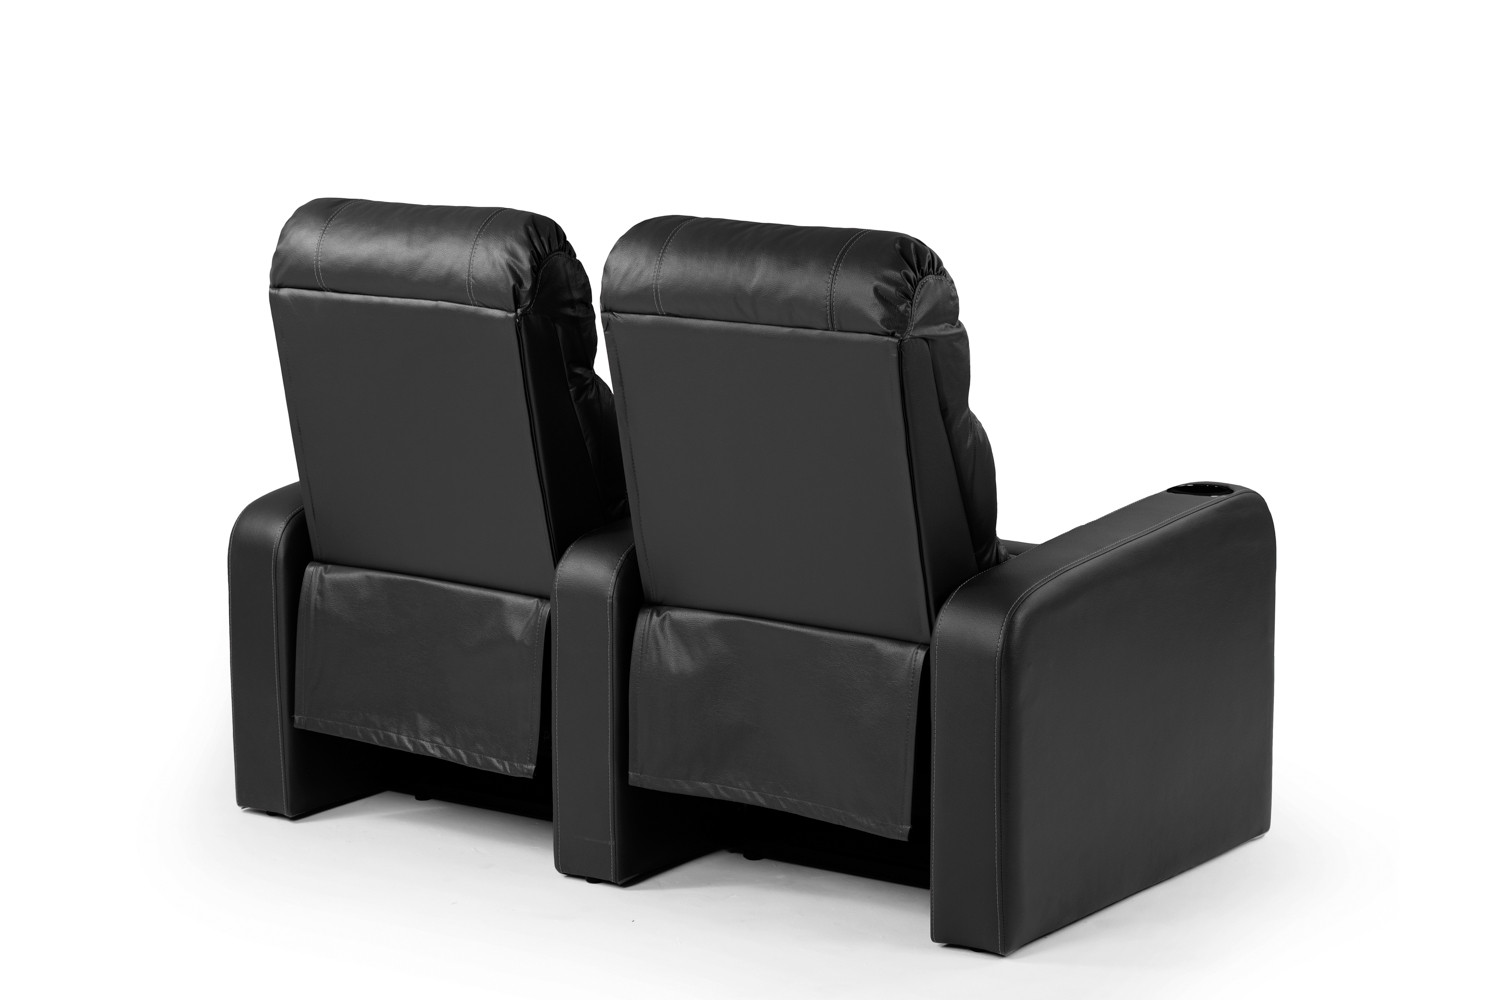 Cinema Pro 2 Seater Recliner - Black Recliner Couches - 7